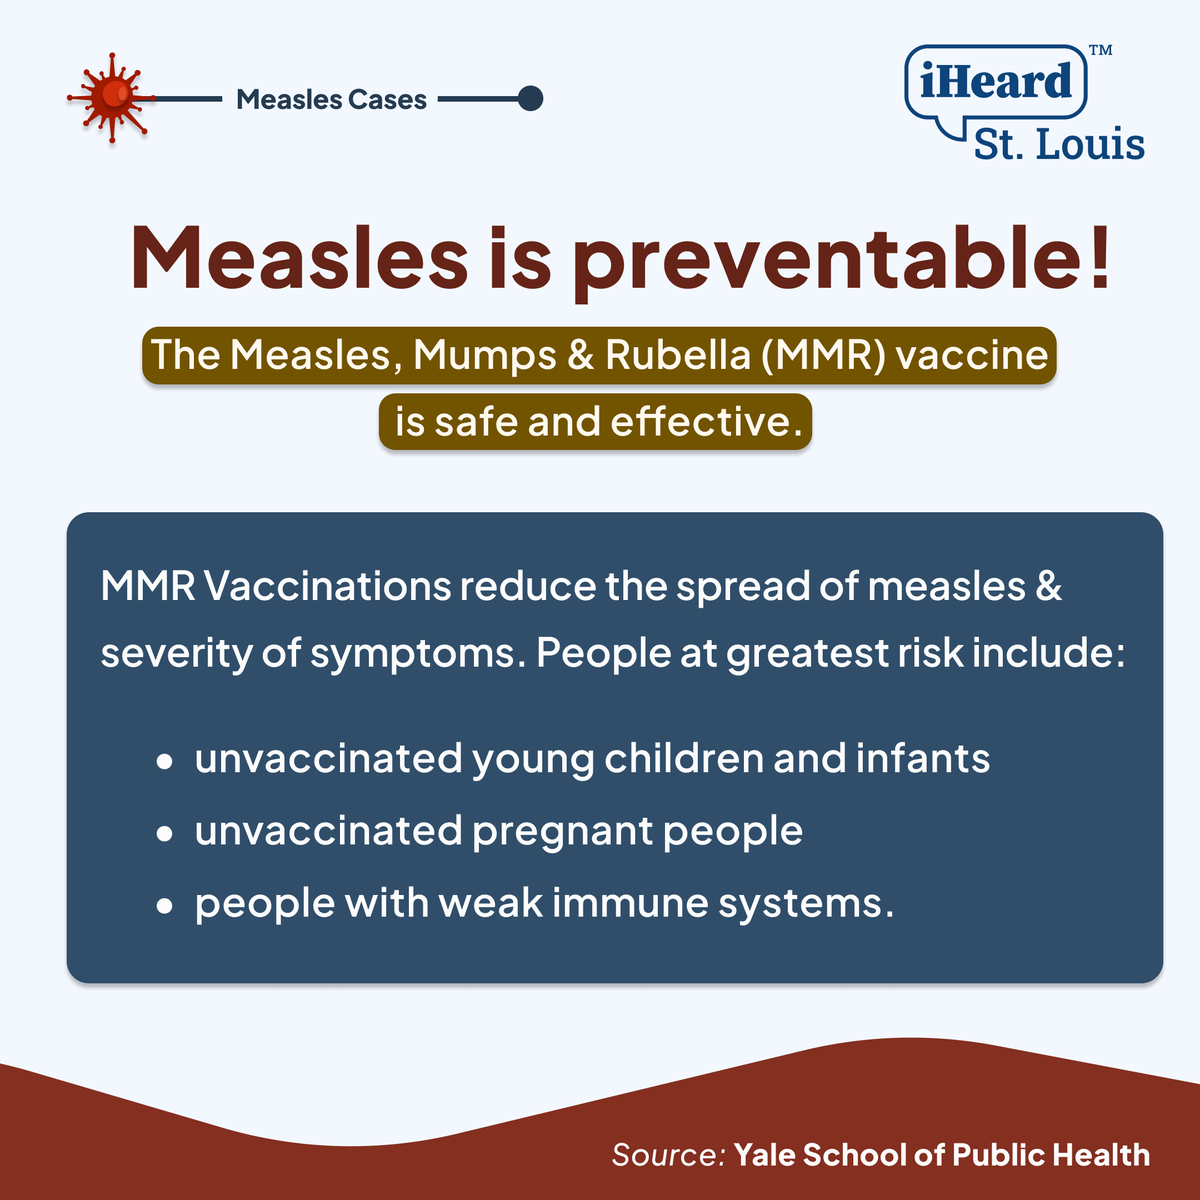 Have you been hearing about the recent measles outbreaks? Swipe to learn more about what’s going on. The takeaway: measles is preventable. Vaccinations reduce the spread of measles & the severity of symptoms. #iHeardSTL #Measles #StayHealthy #GetVaccinated